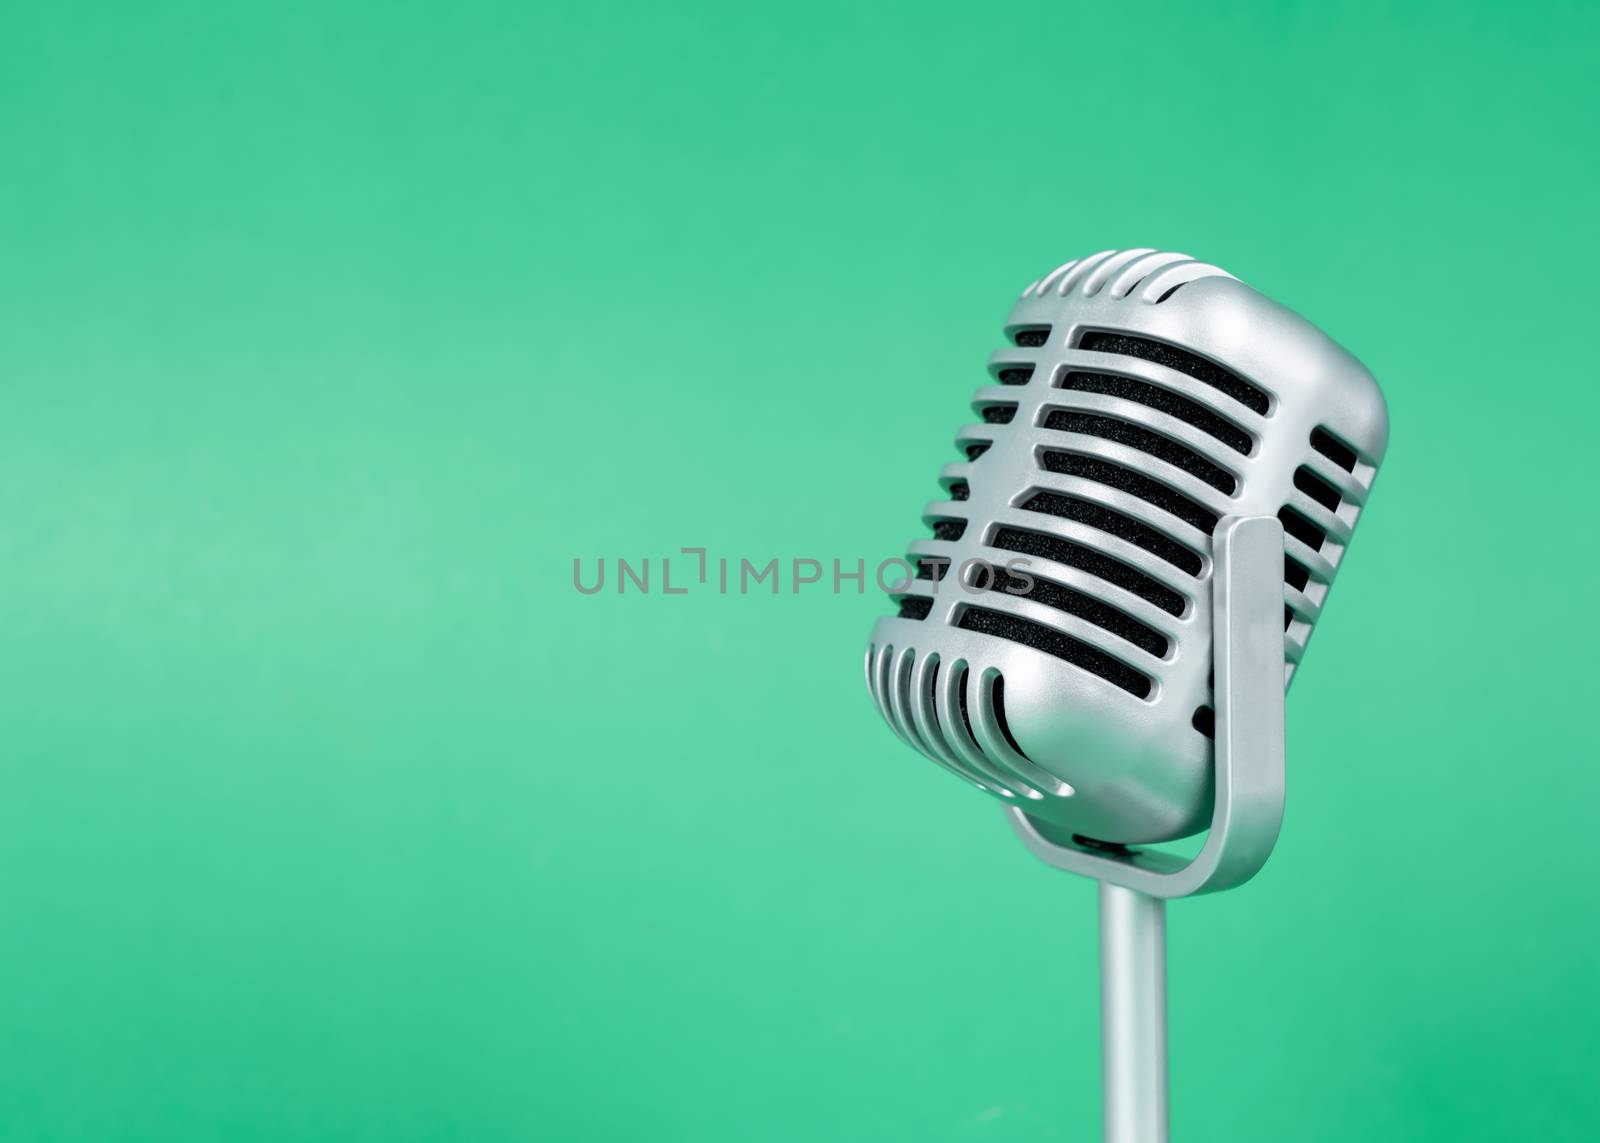 Retro microphone with copy space on green background by Buttus_casso